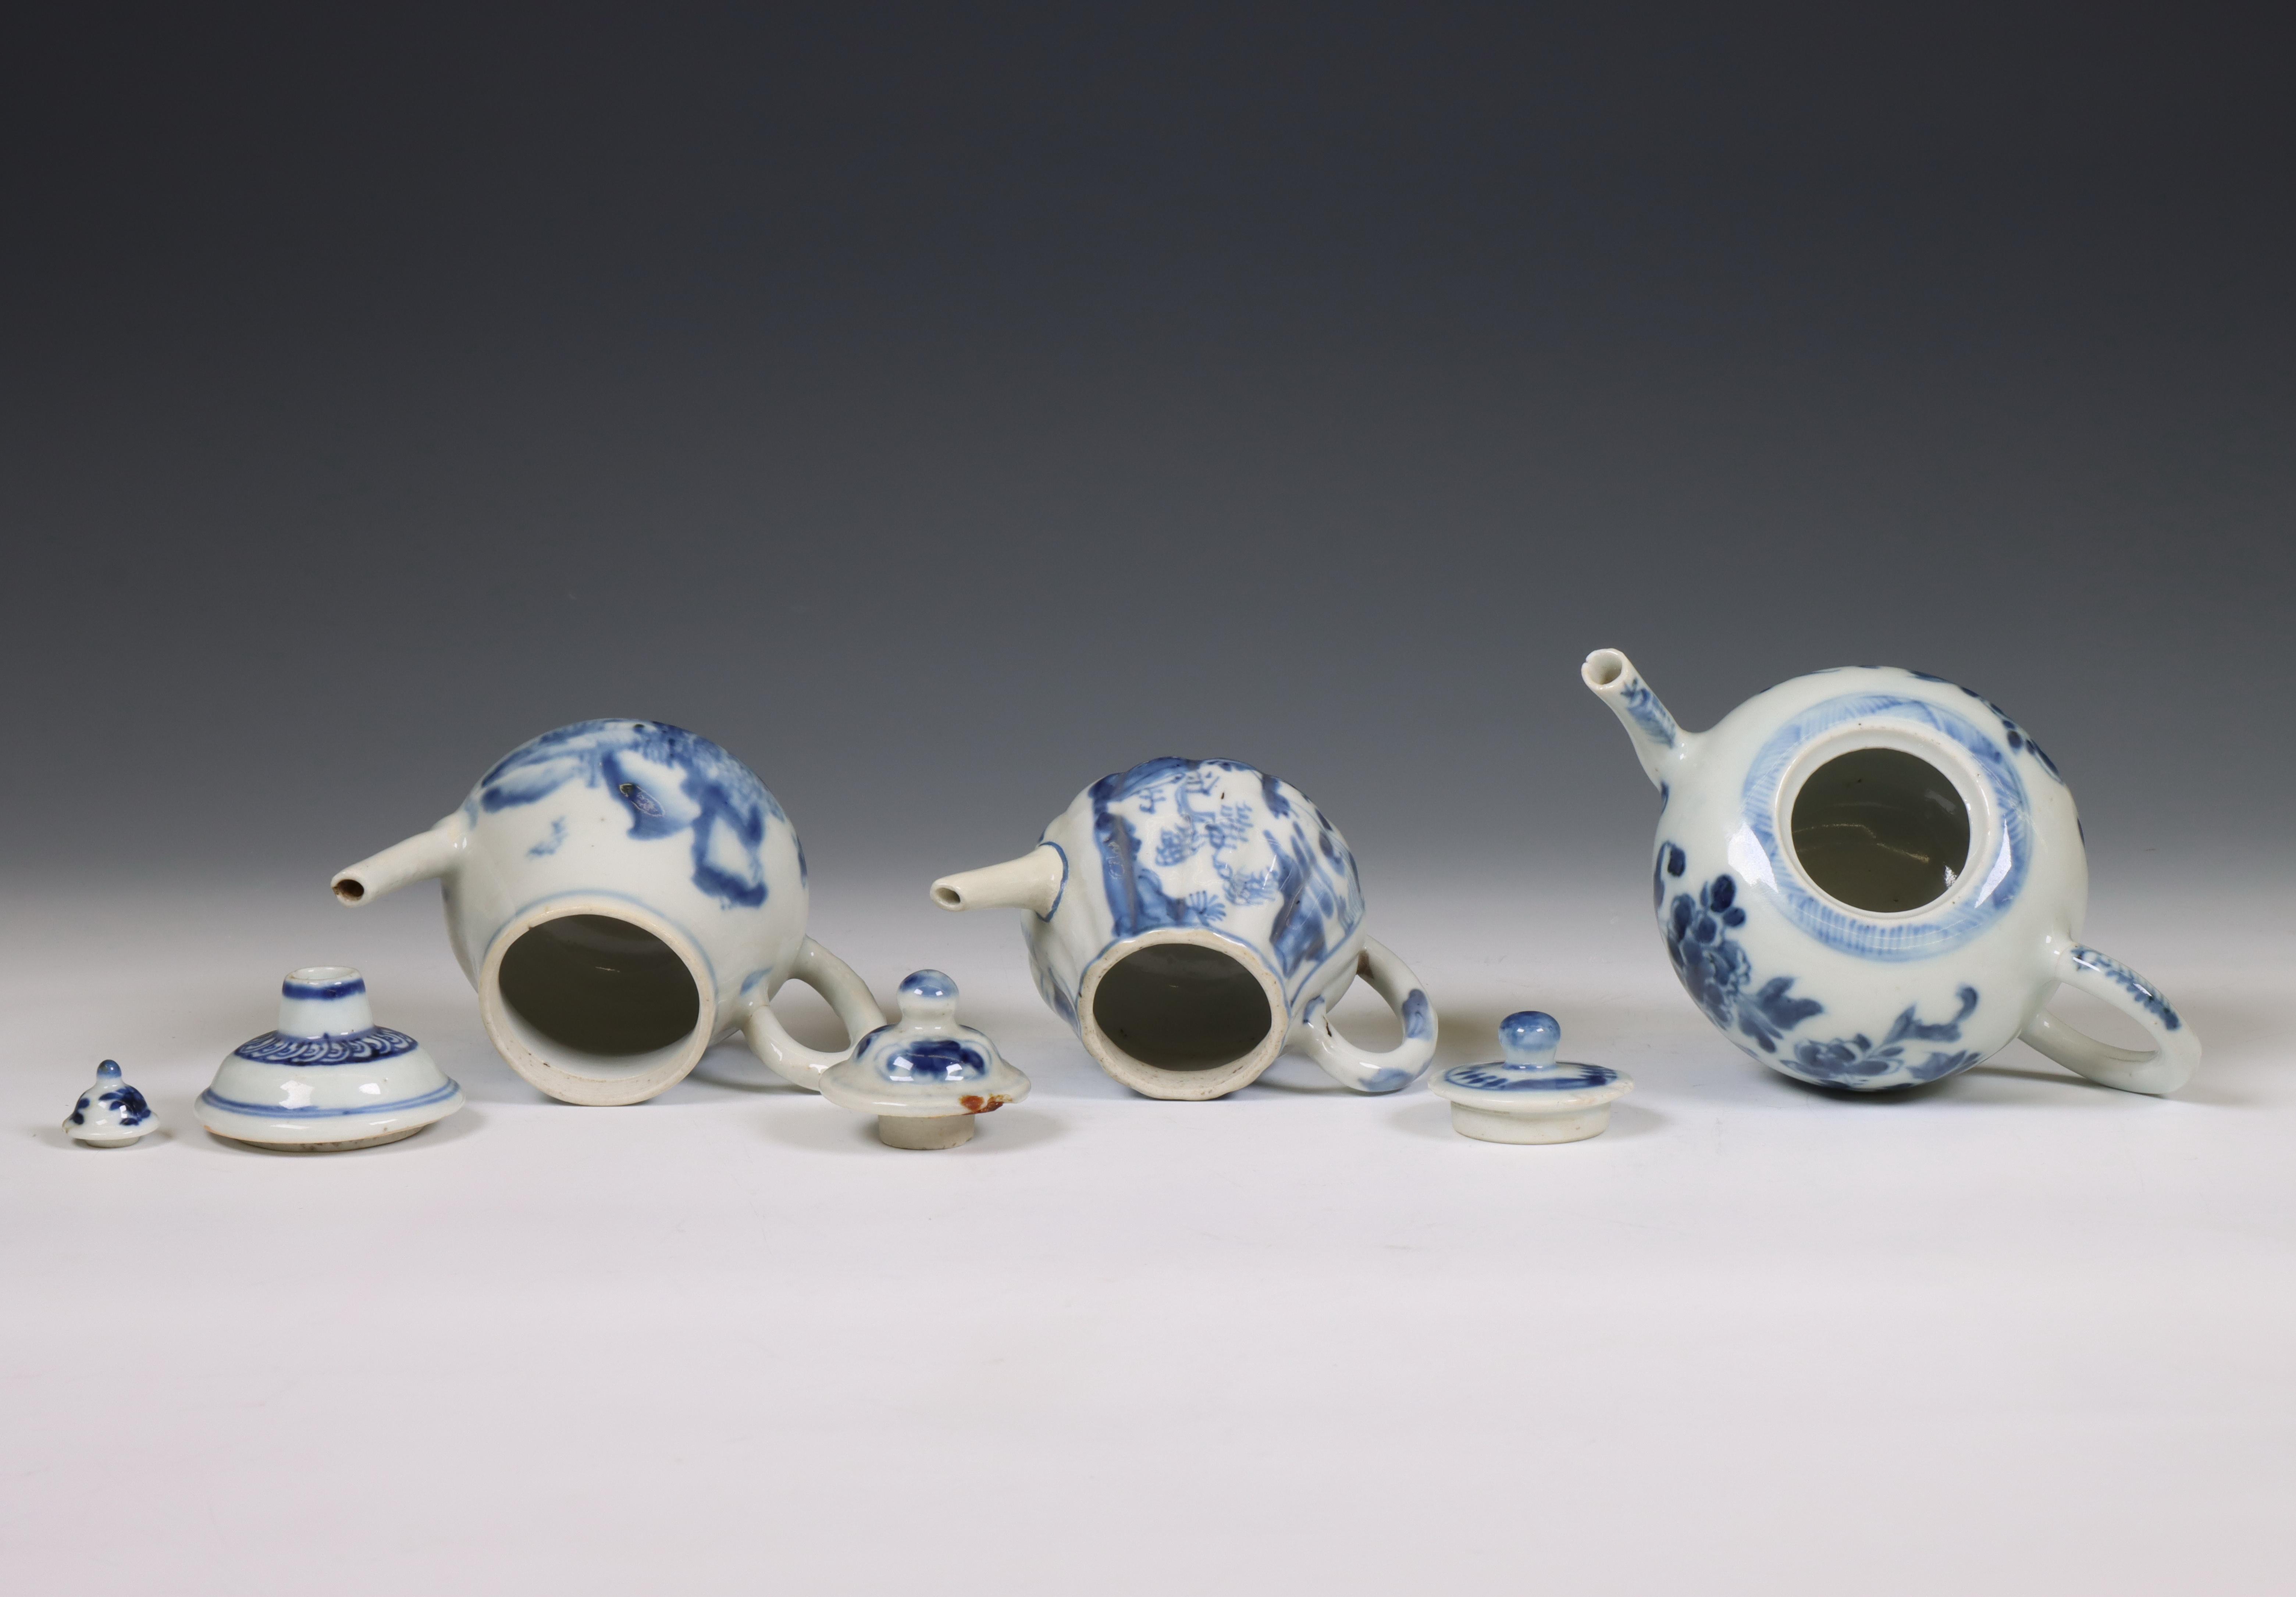 China, three blue and white porcelain teapots, 18th century, - Image 4 of 6